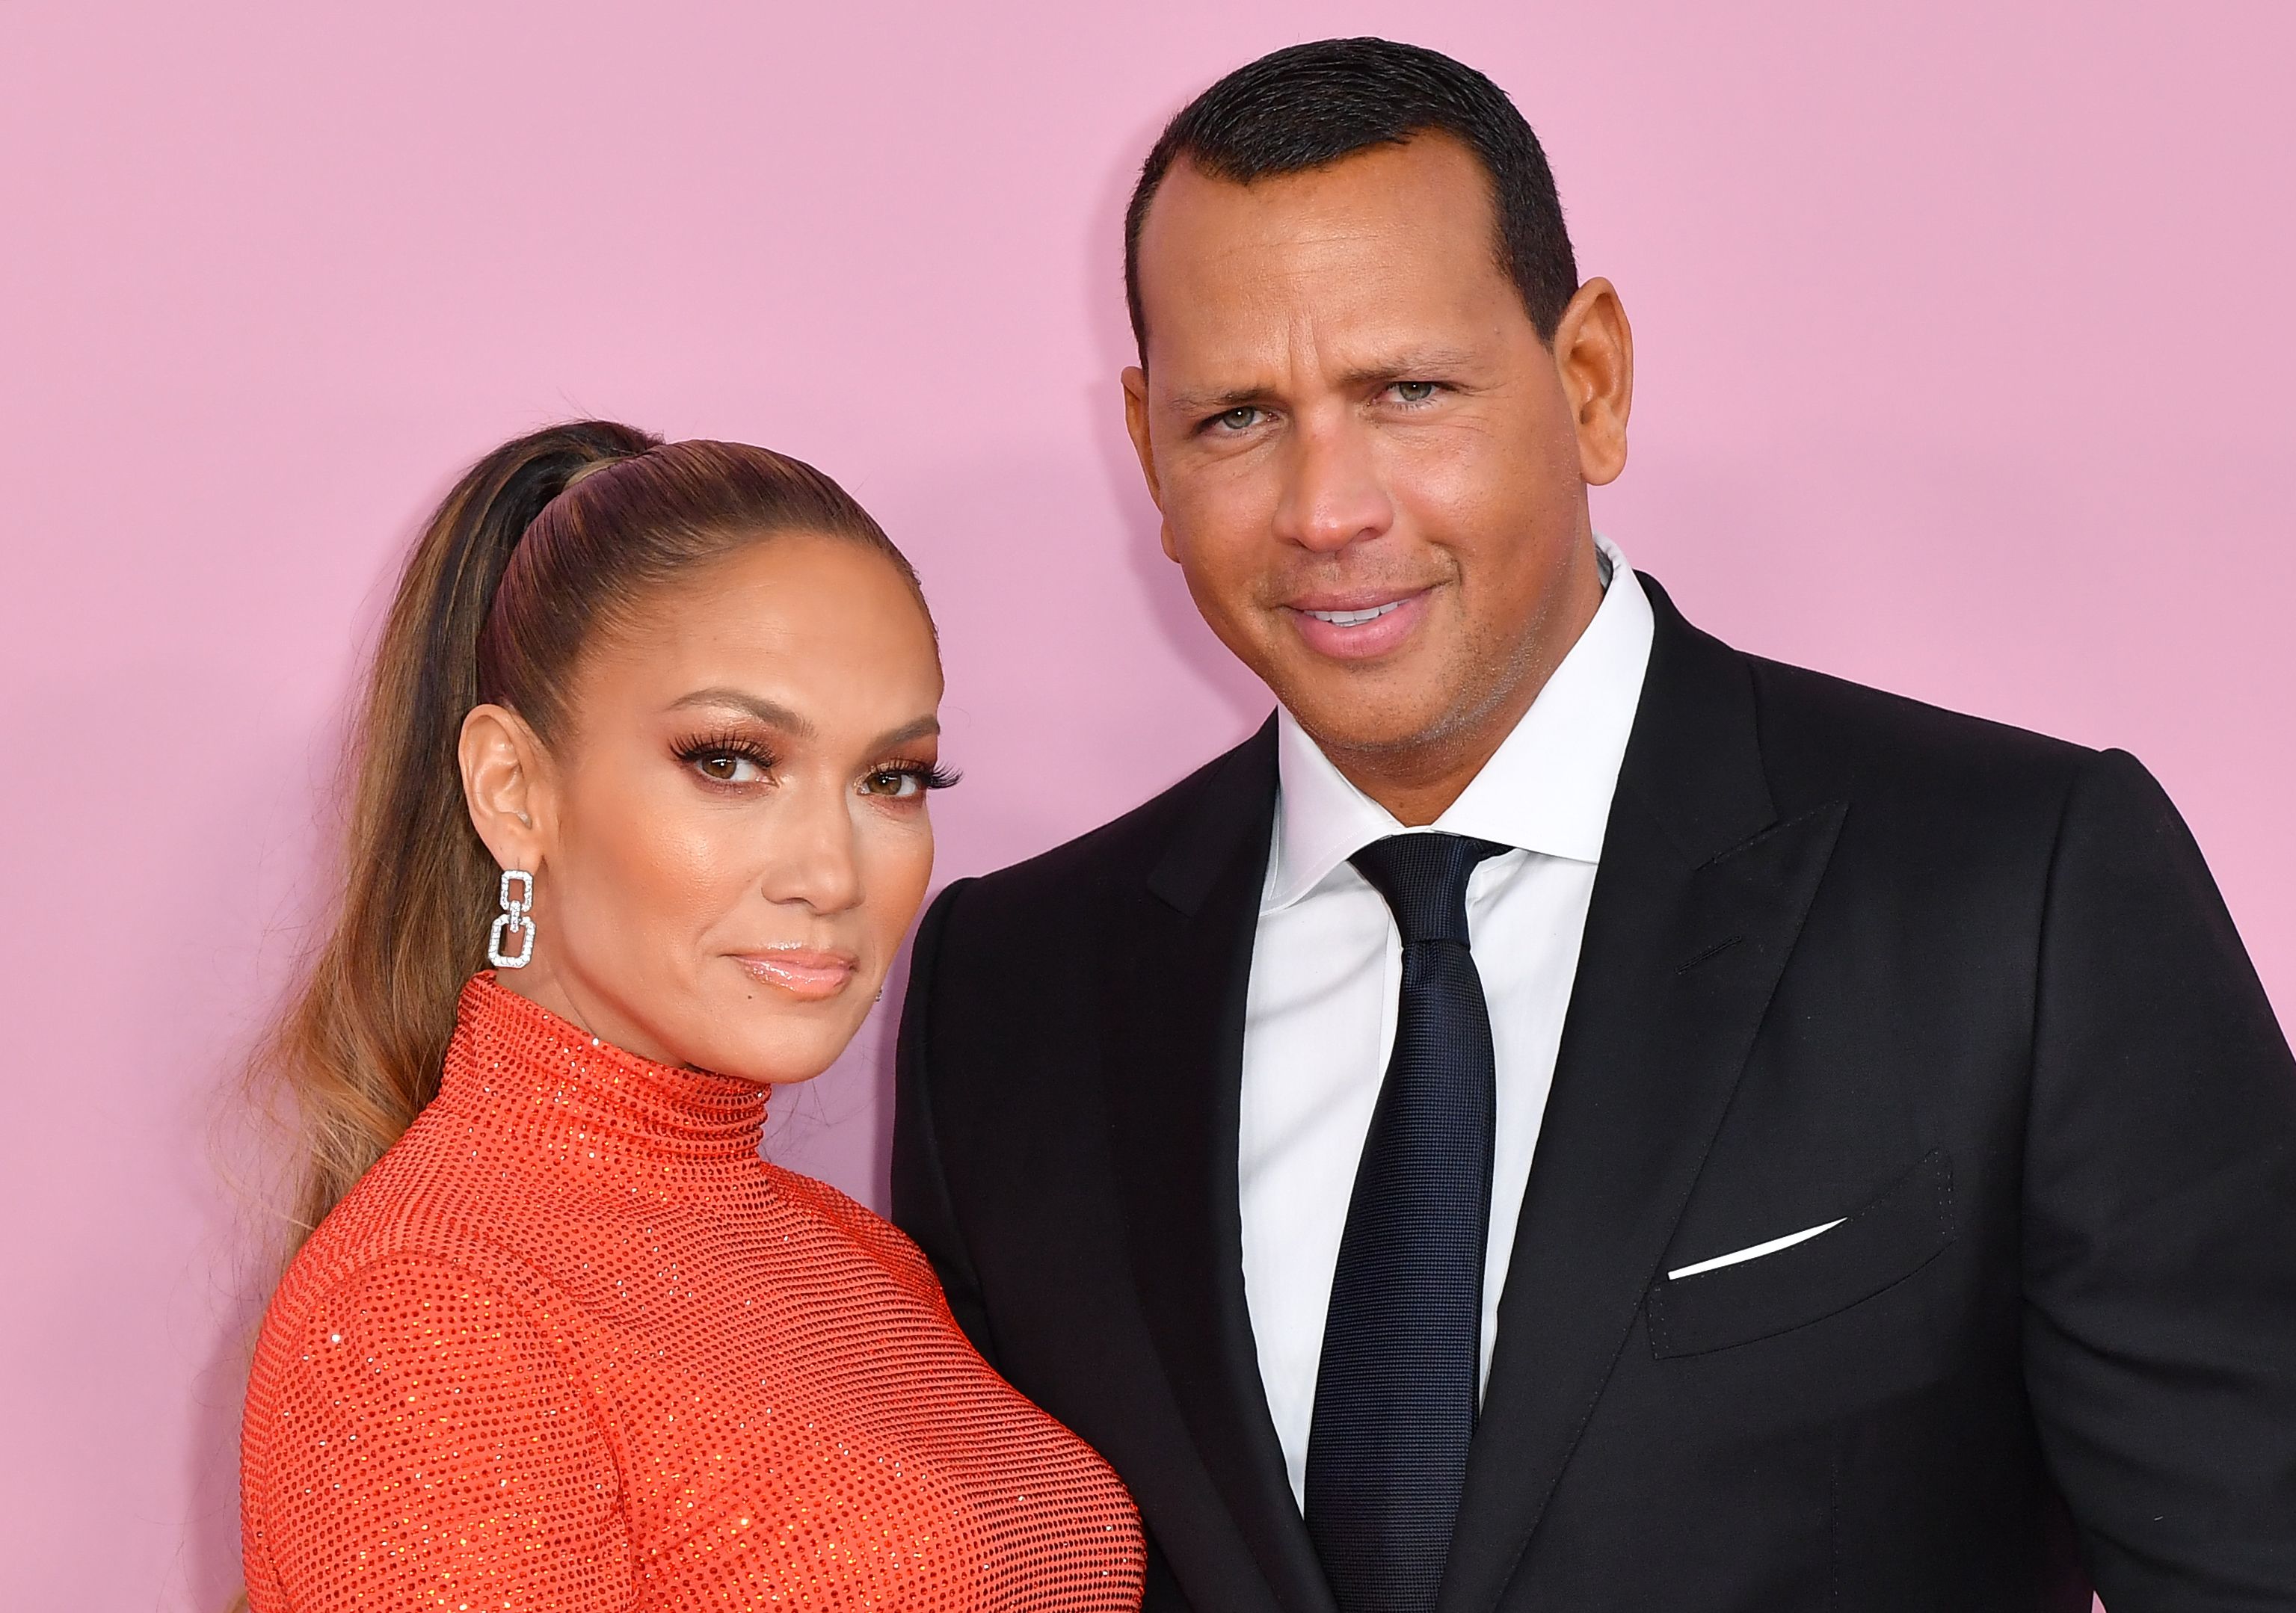 Jennifer Lopez and Alex Rodriguez pose during a media event.